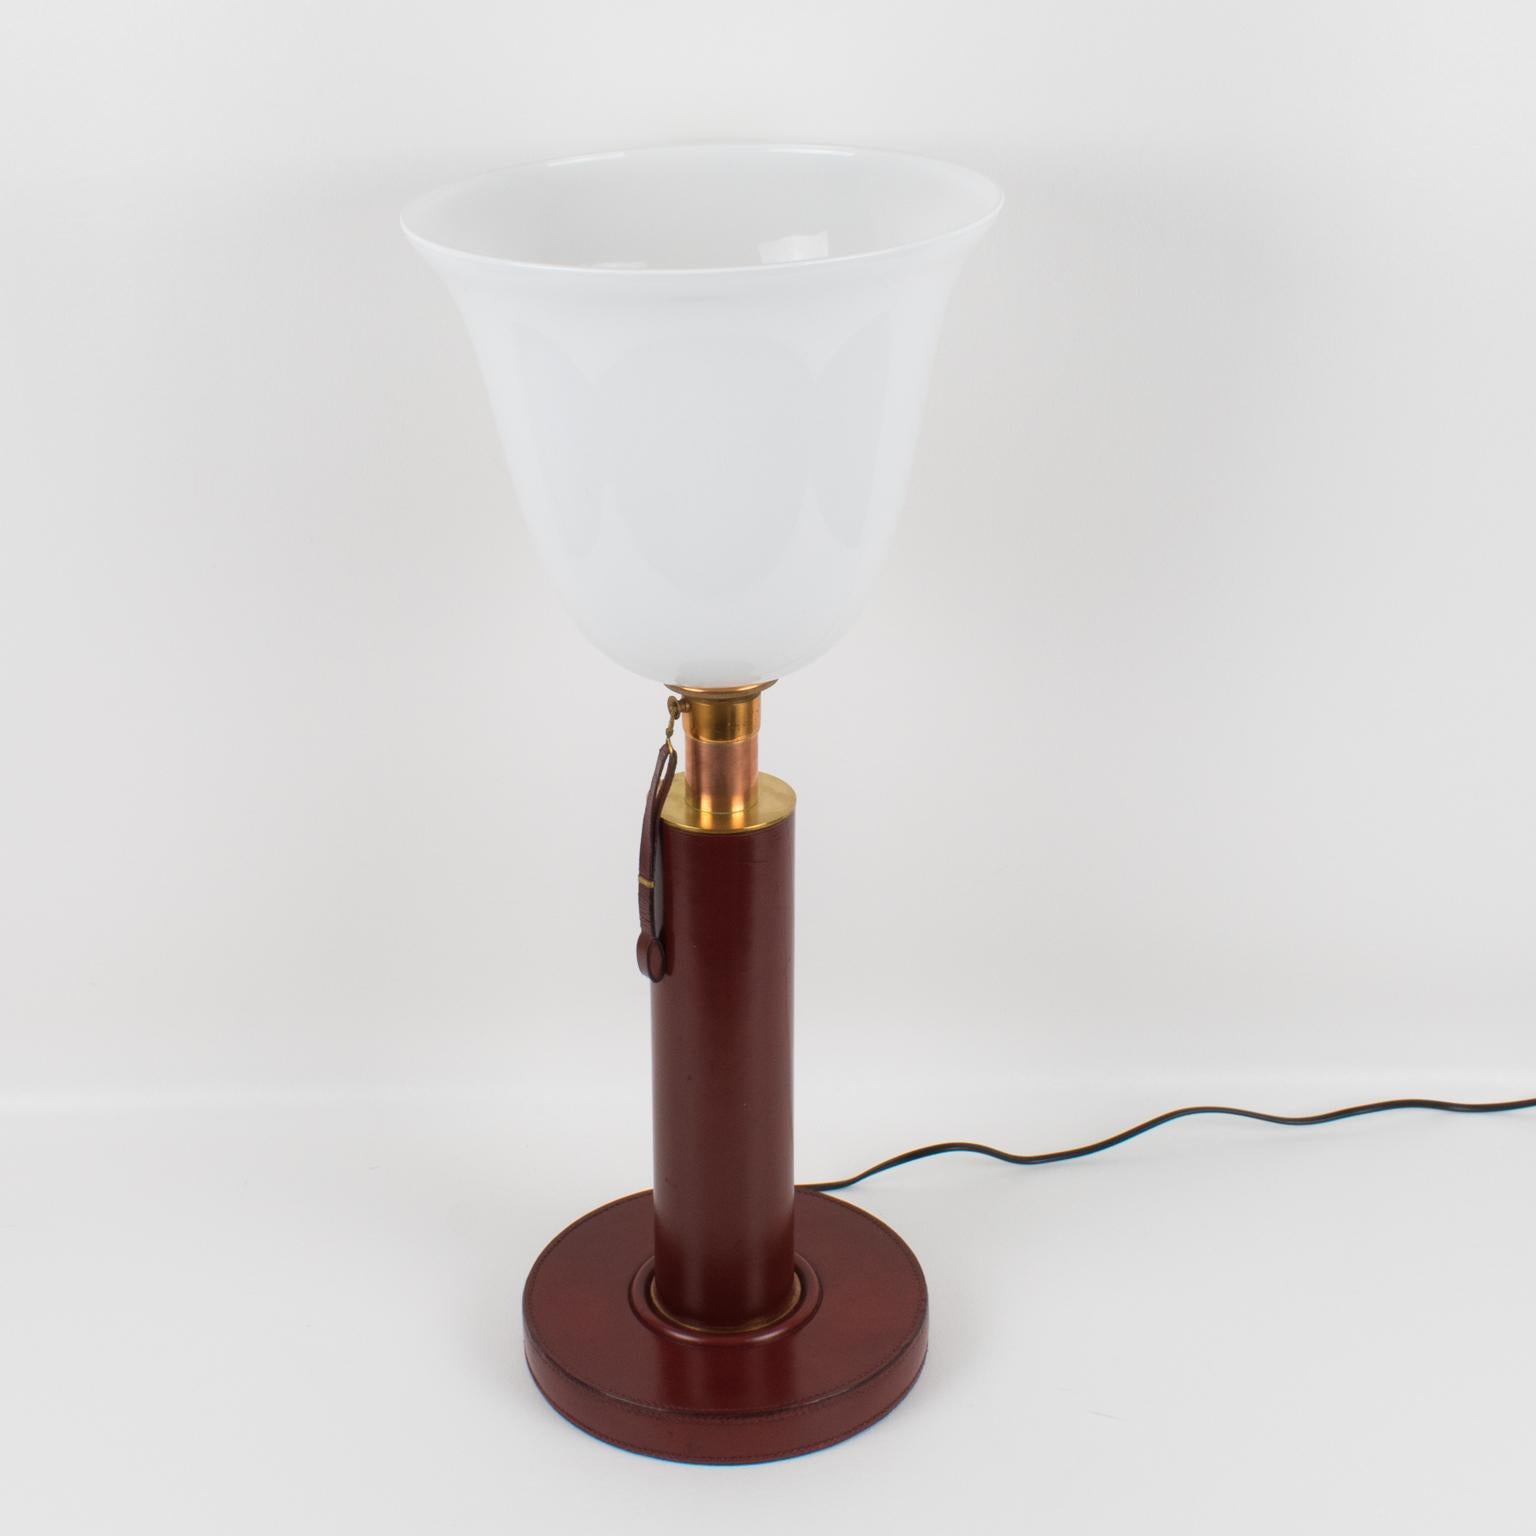 Paul Dupre Lafon 1950s French Art Deco Hand-Stitched Red Leather Table Lamp 15